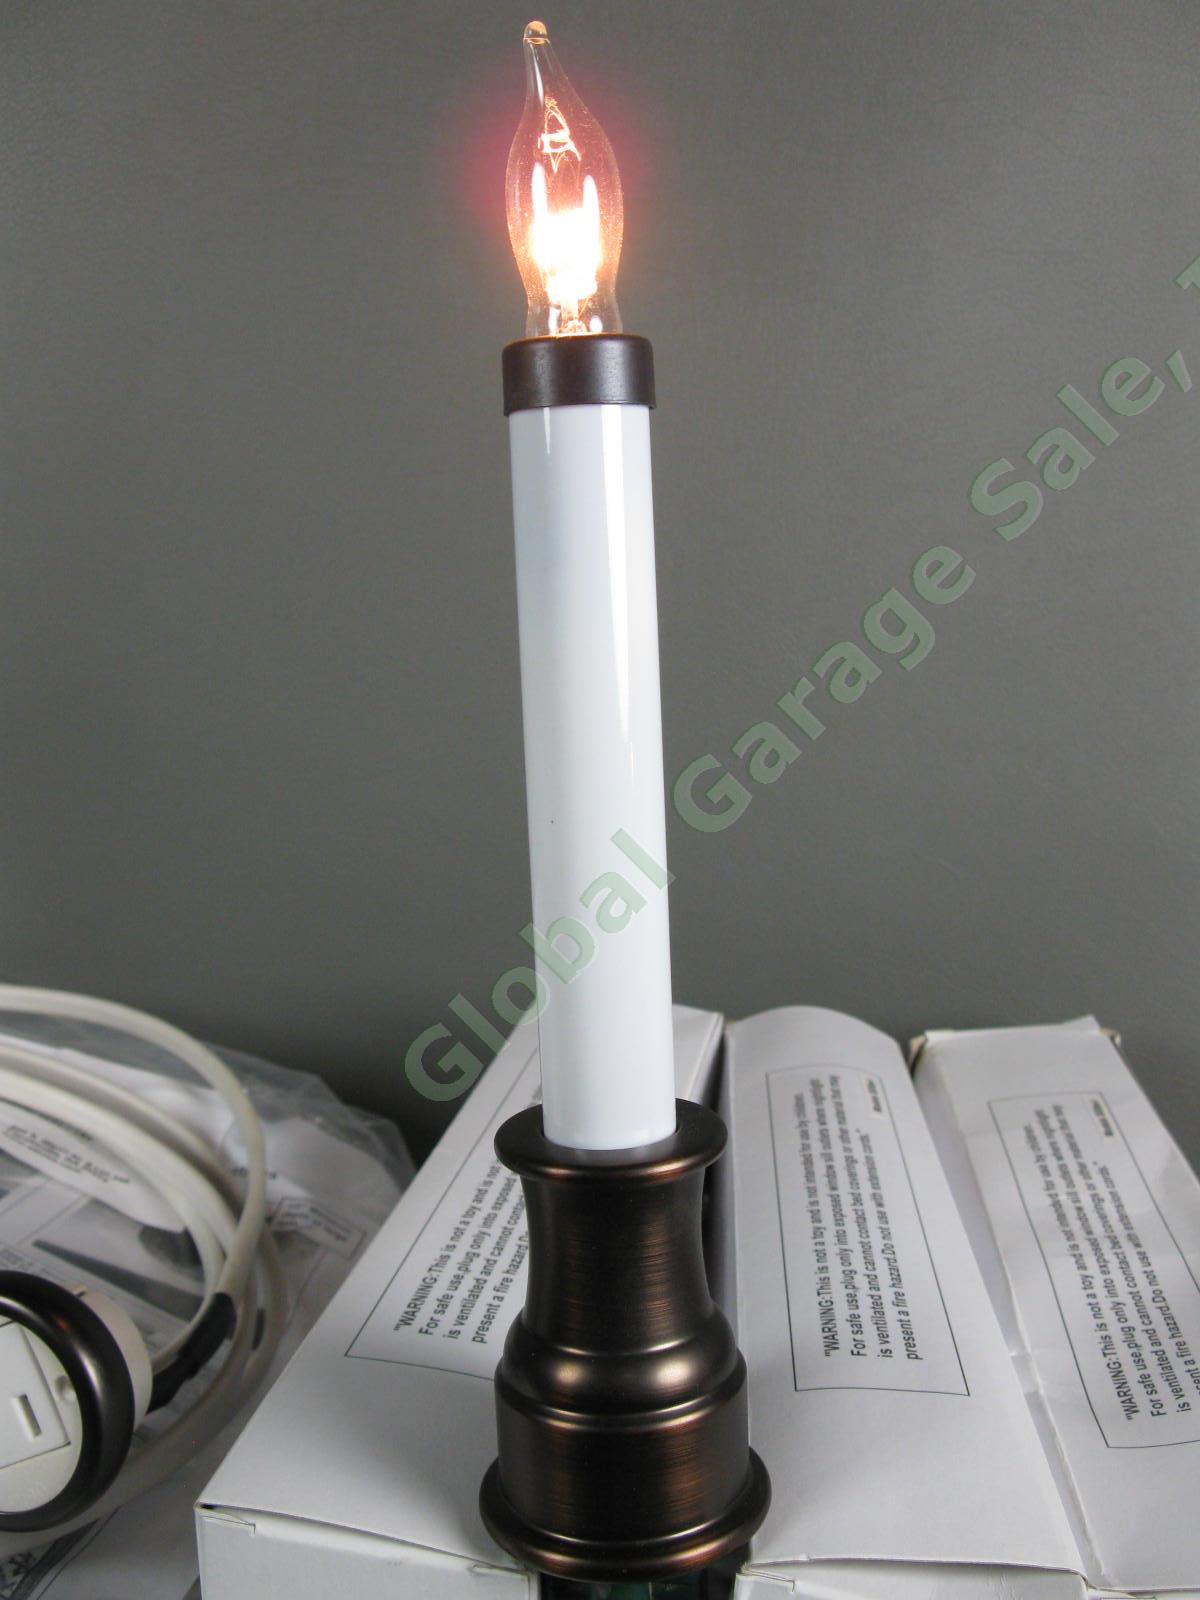 14 Complete Sillites Window Sill Plug in Candle System RR9W Receptacle SL7AB 1